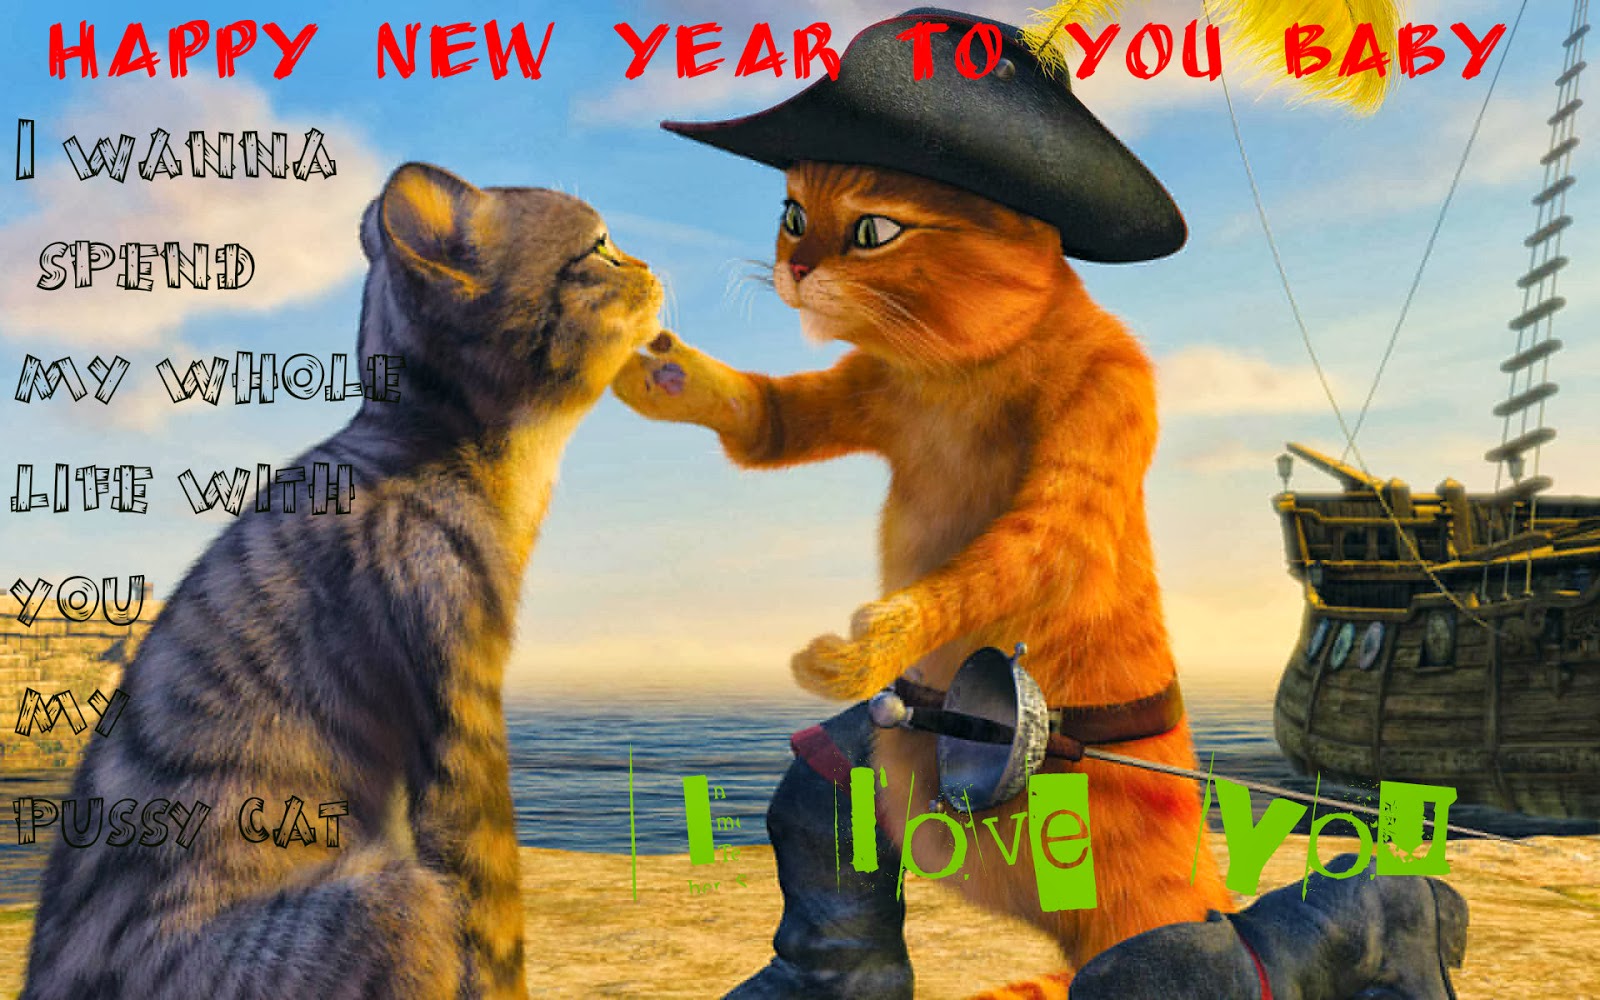   Couple Happy New Year 2015 Funny Pictures HD Wallpapers Free Download  download best wishes for you the one